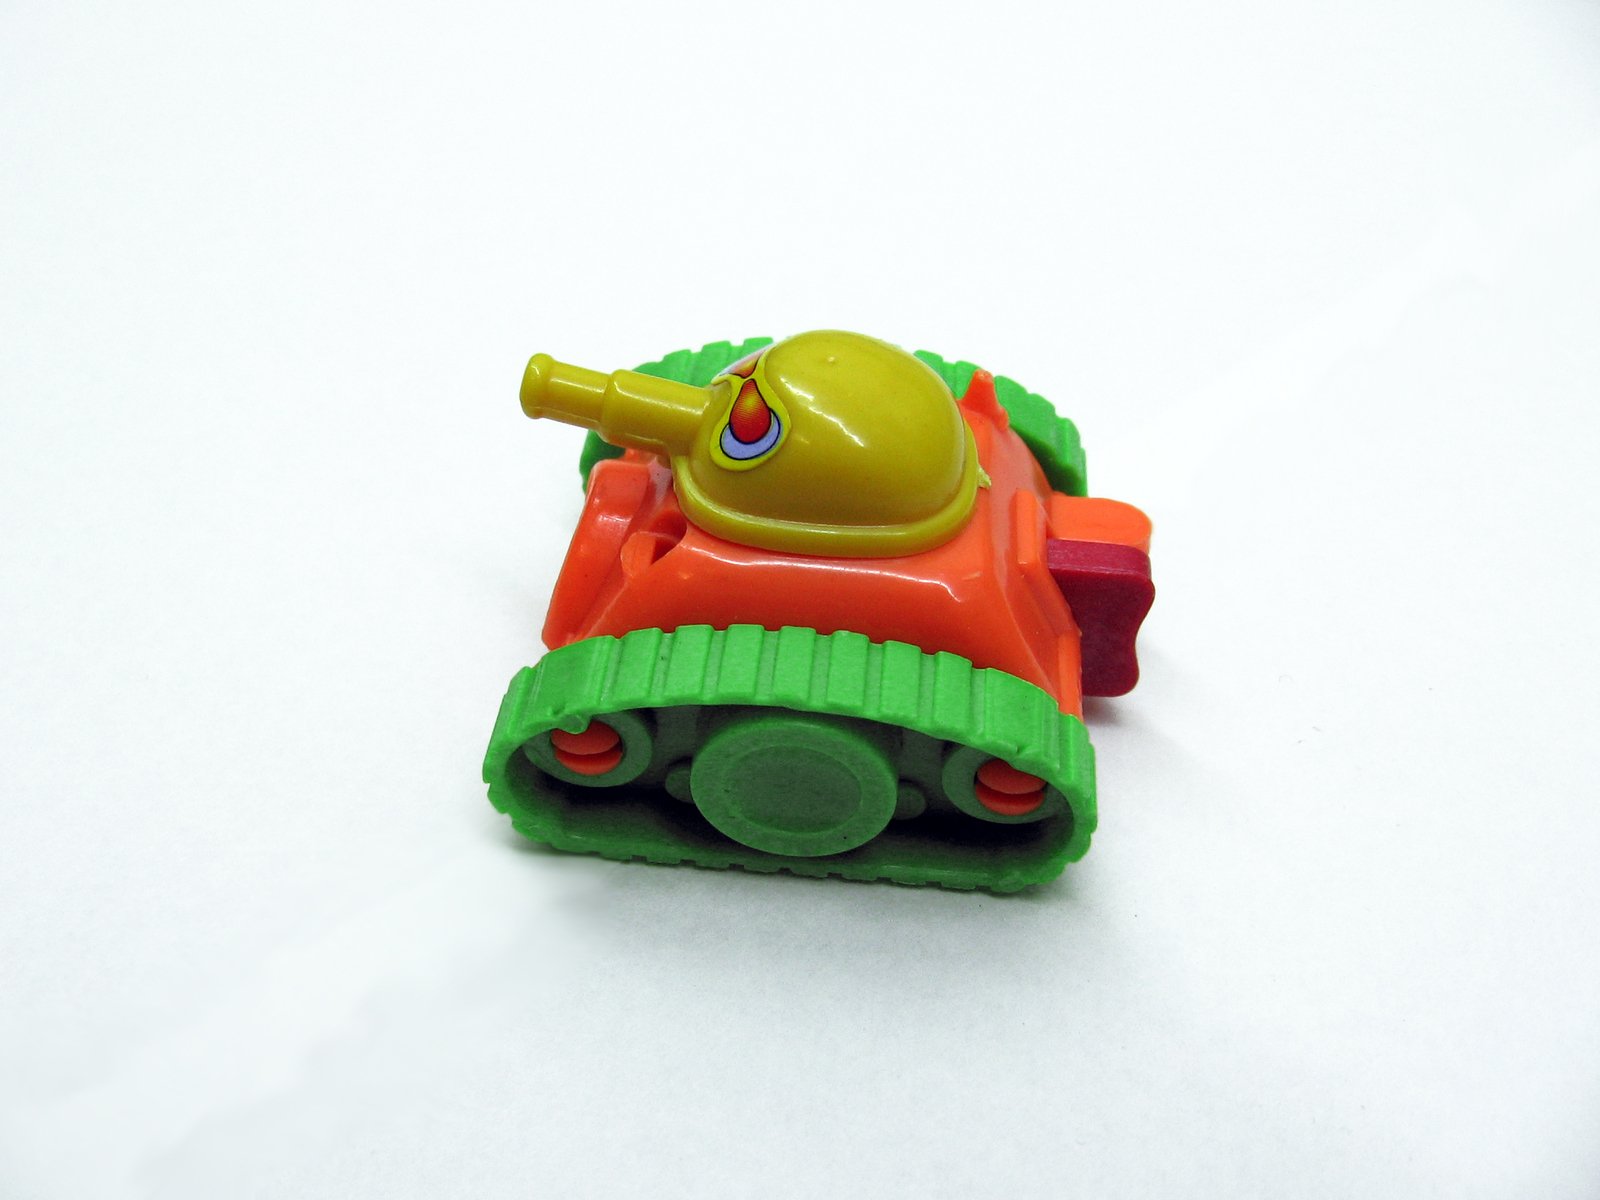 small green and red toy car with orange handle